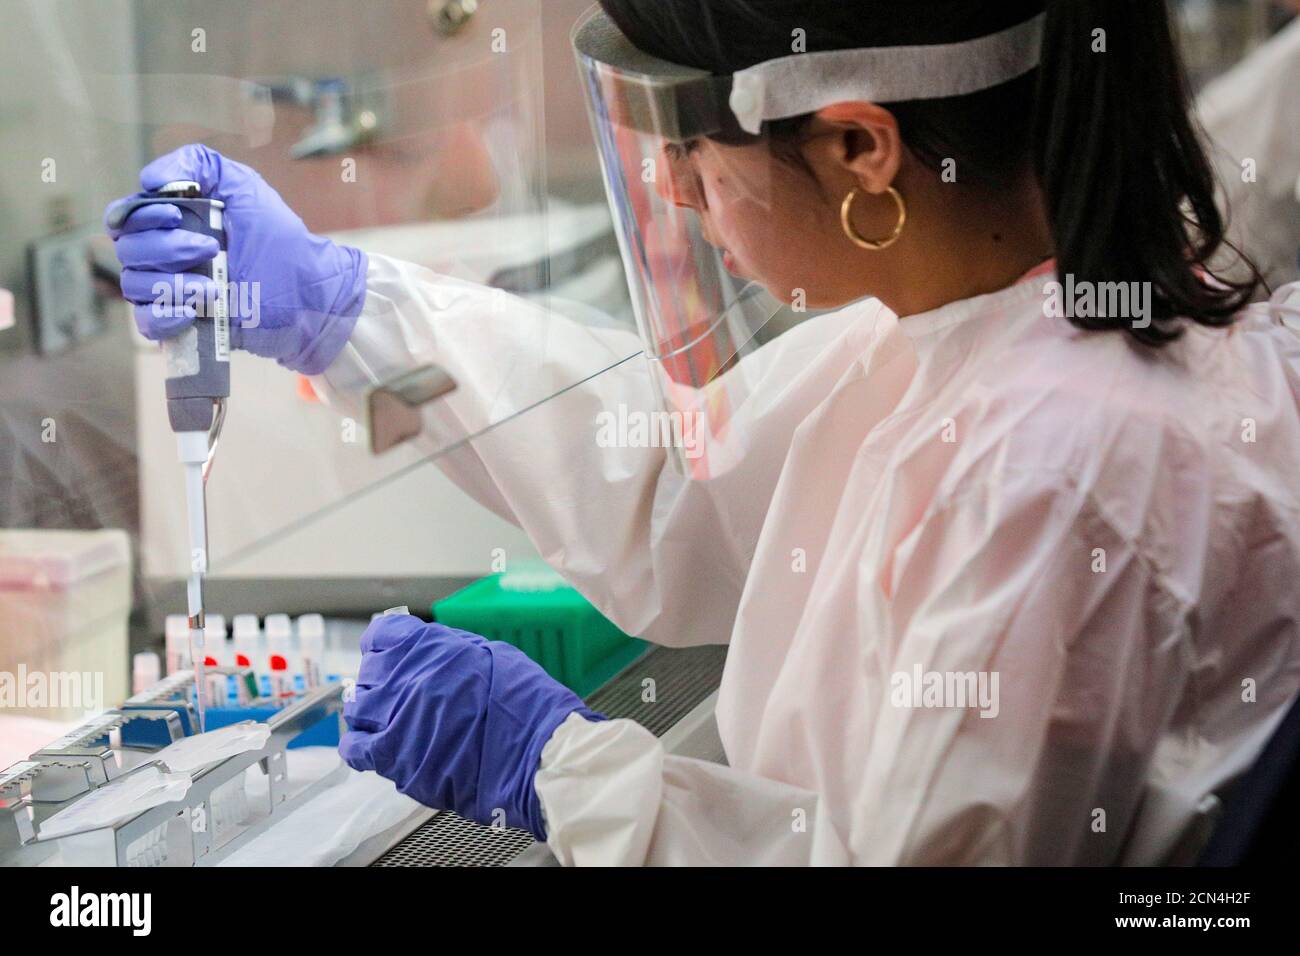 Scientists work in a lab testing COVID-19 samples at New York City's health department, during the outbreak of the coronavirus disease (COVID-19) in New York City, New York U.S., April 23, 2020. Picture taken April 23, 2020. REUTERS/Brendan McDermid Stock Photo